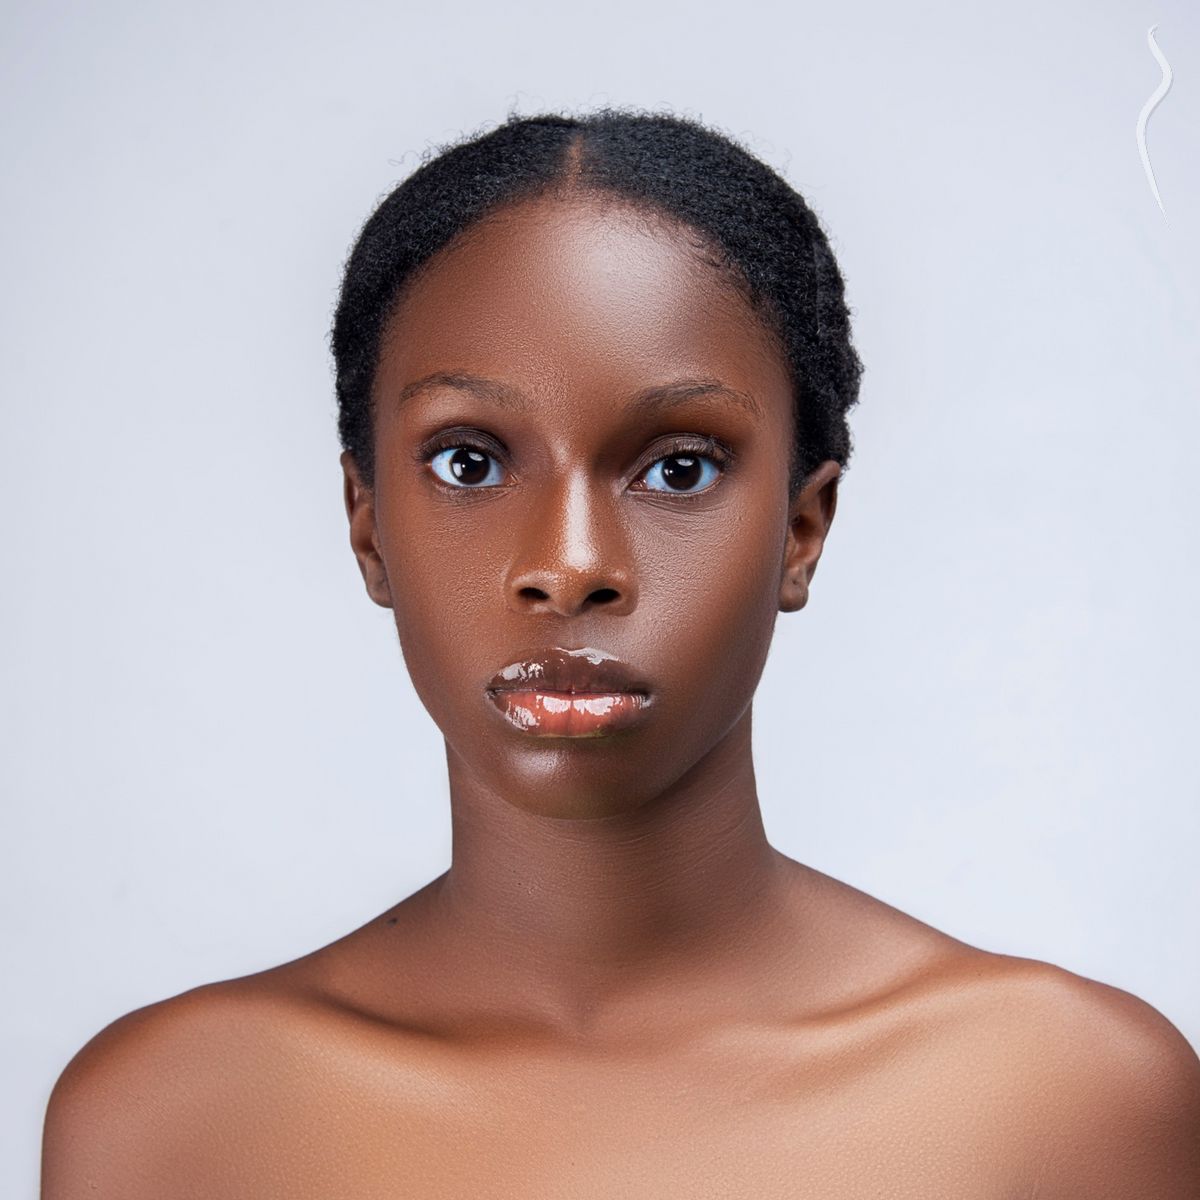 Esther Abraham - a model from Nigeria | Model Management